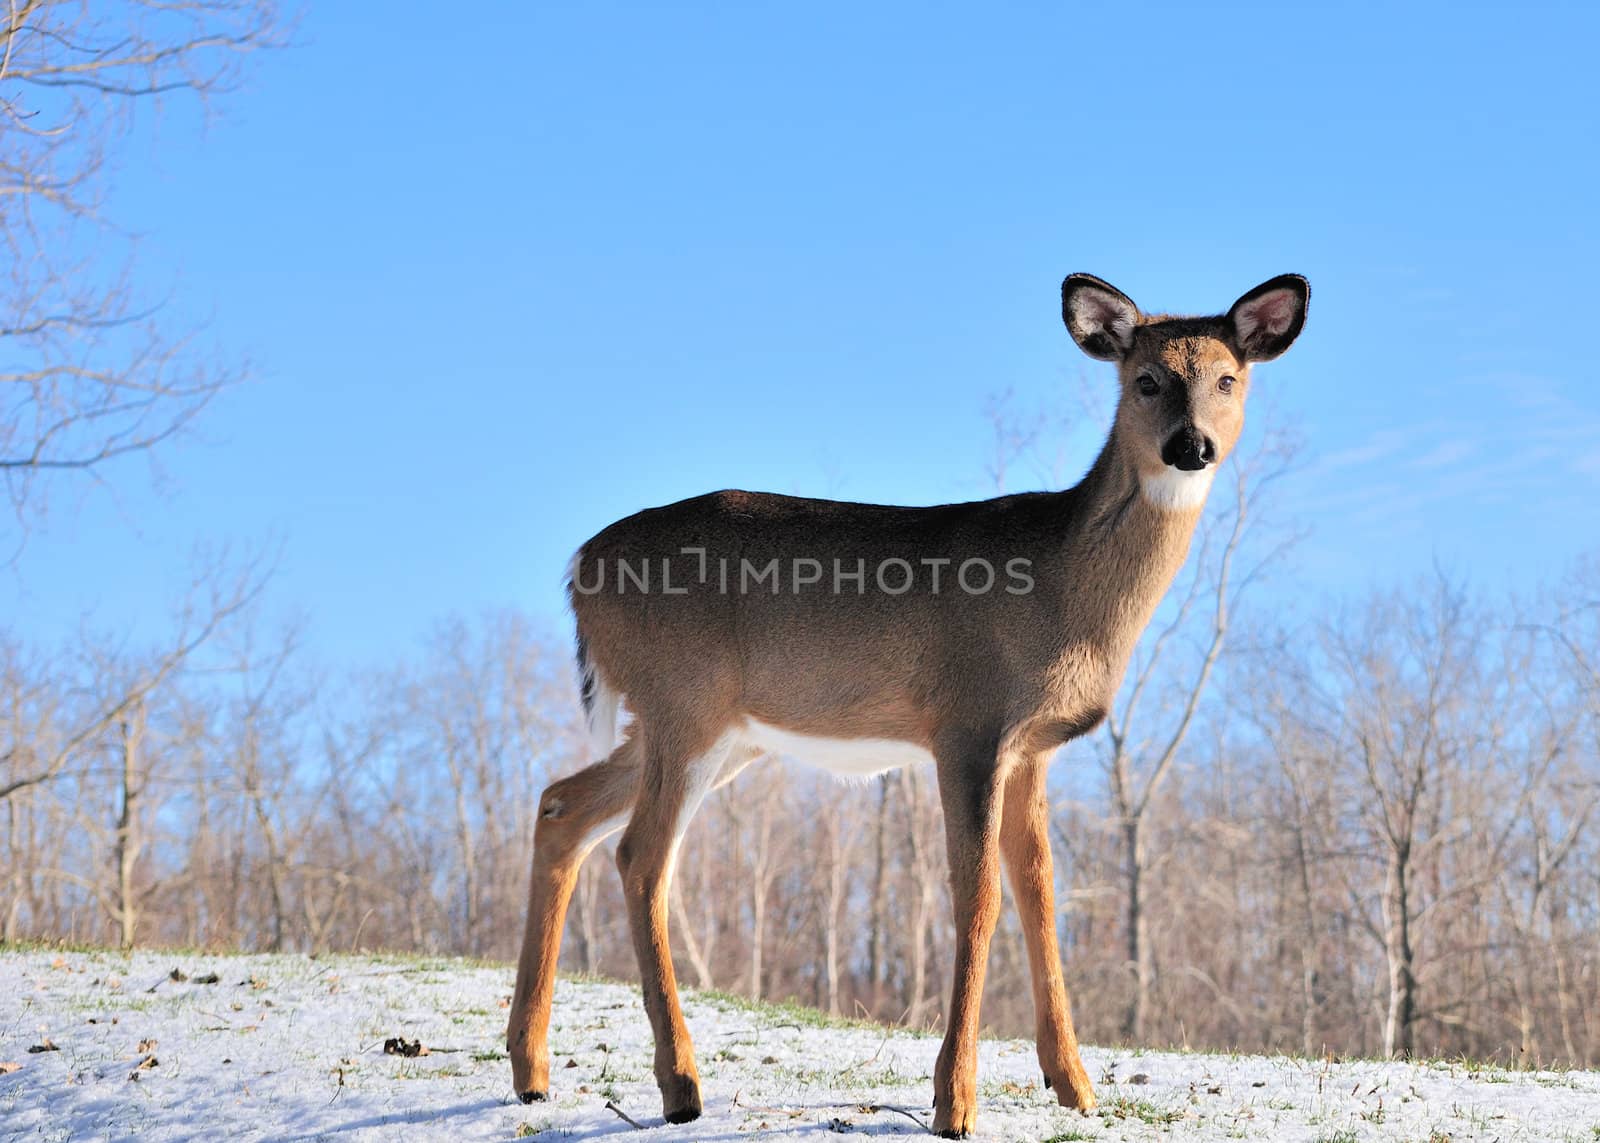 Whitetail deer yearling standing in winter snow.